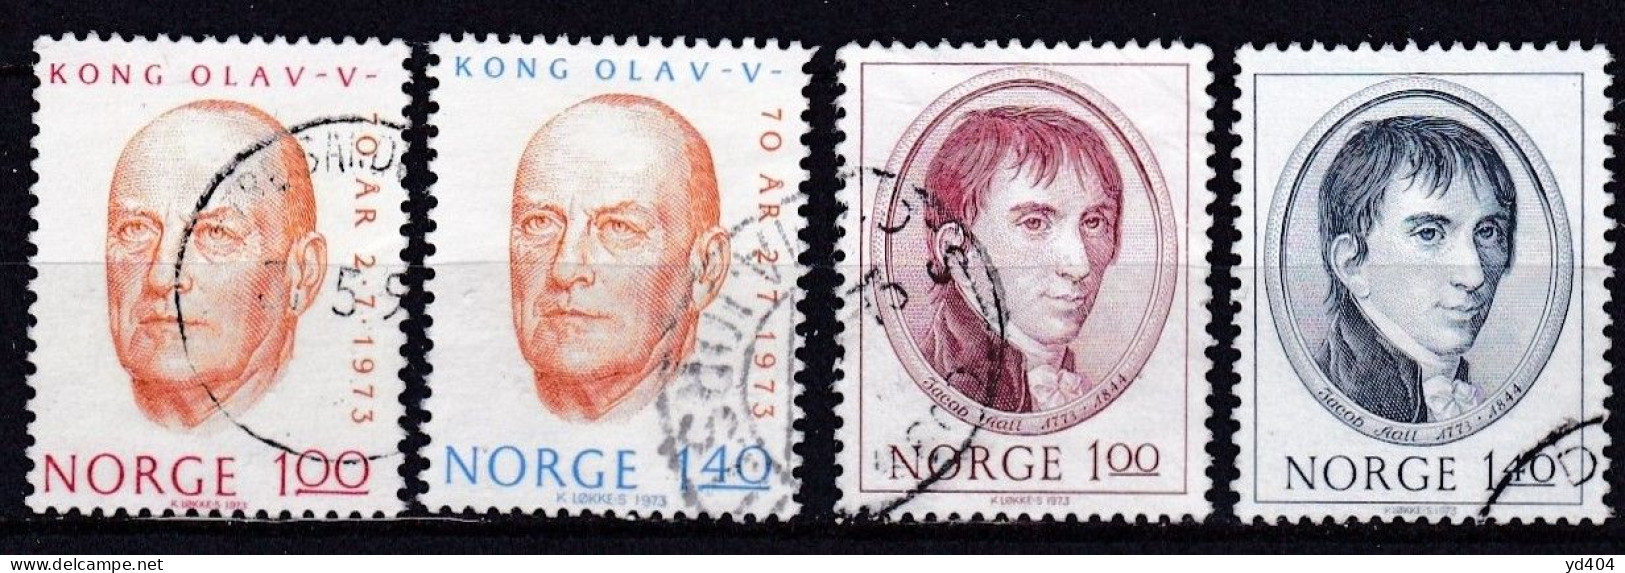 NO087 – NORVEGE - NORWAY – 1973 – FULL YEAR SET – Y&T # 614/31 USED 15,70 € - Used Stamps